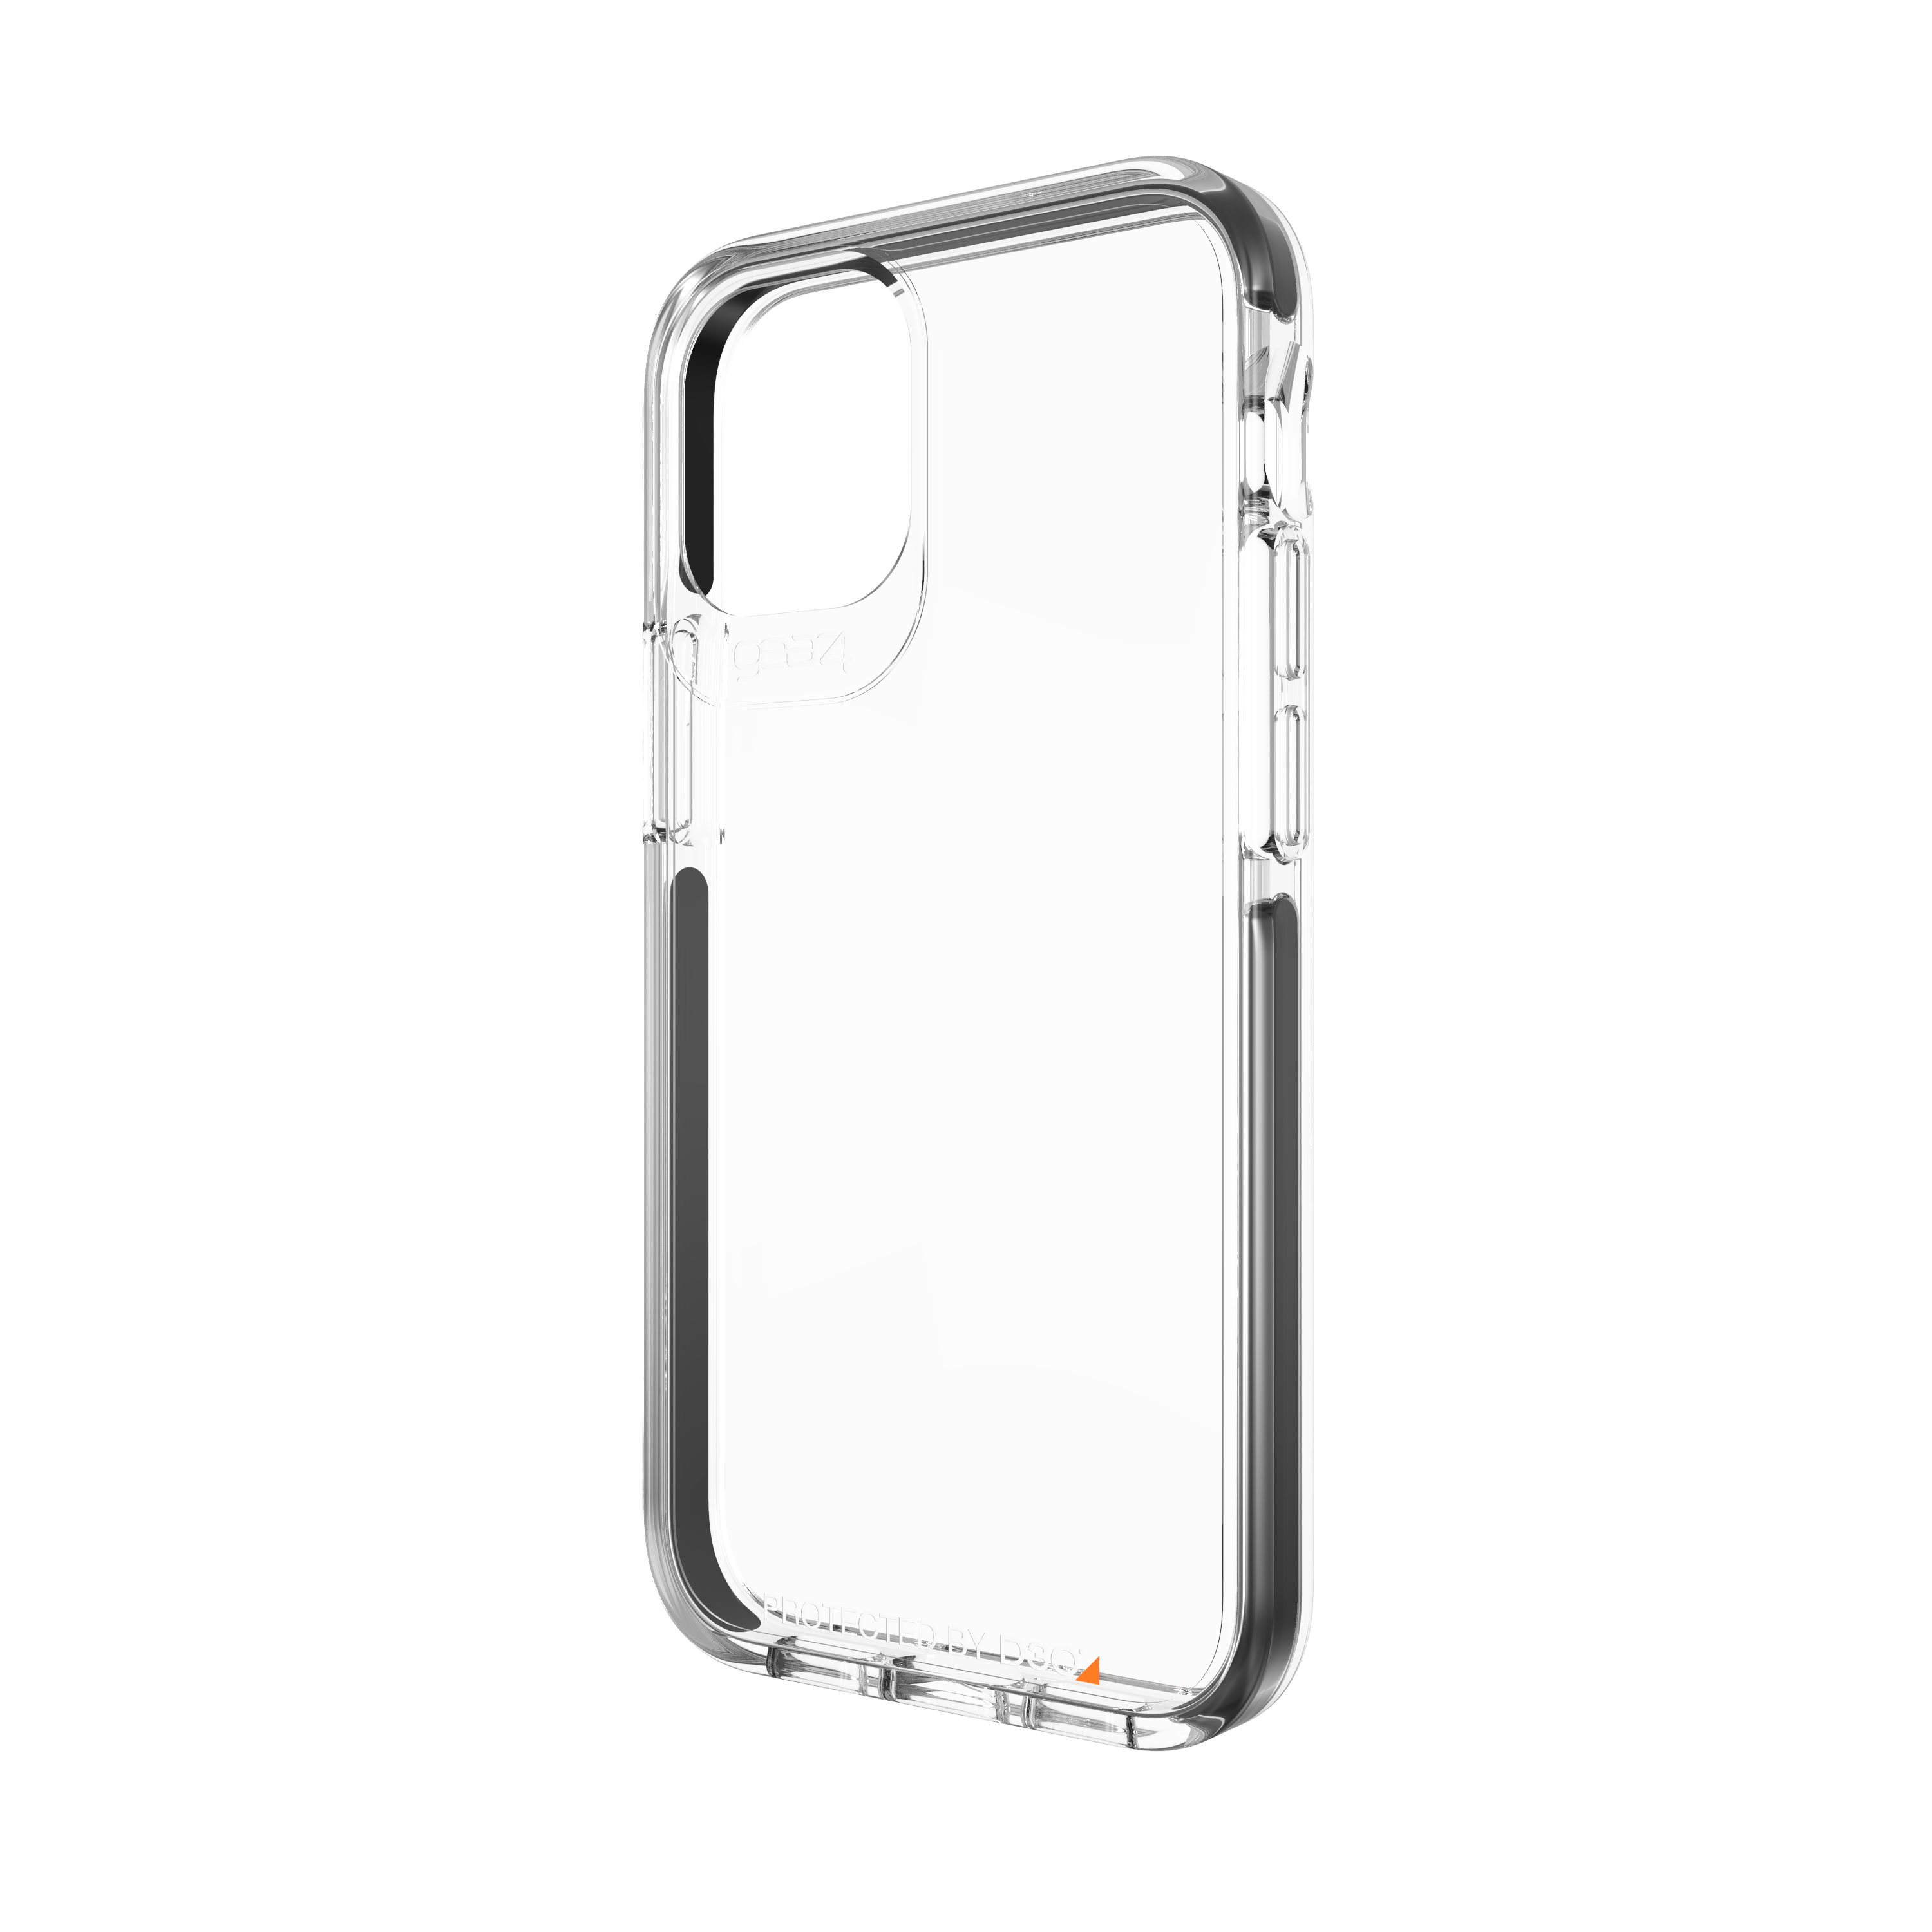 IPHONE GEAR4 APPLE, Backcover, Piccadilly, MINI, BLACK 12